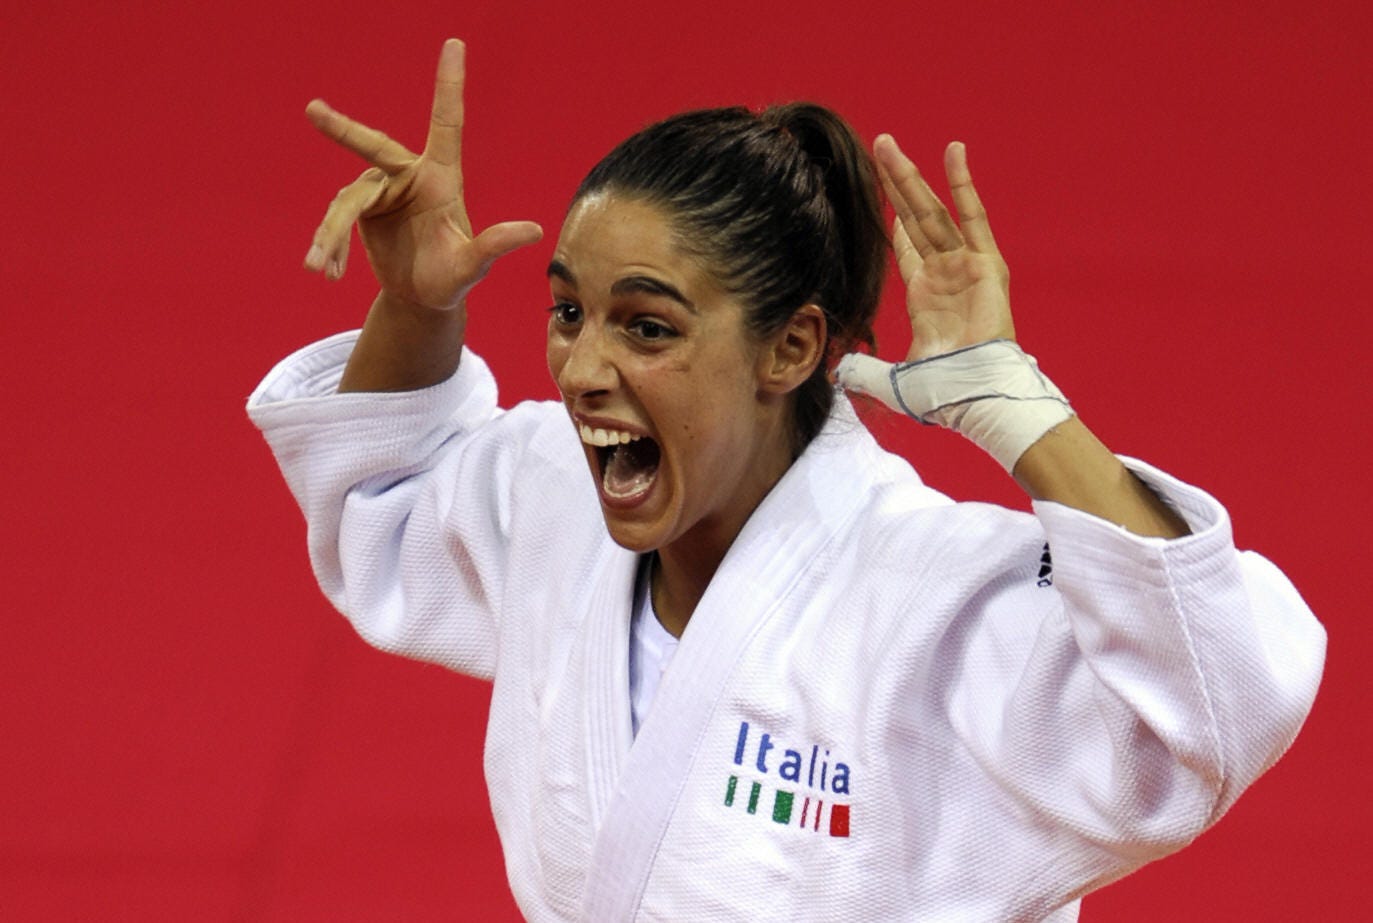 italys giulia quintavalle celebrates on the podium before receiving her gold medal for the womens  57kg of the 2008 beijing olympic games on august 11, 2008 in beijing italy giulia quintavalle won the judo final against netherlands deborah gravenstijn     afp photo  olivier morin photo credit should read olivier morinafp via getty images